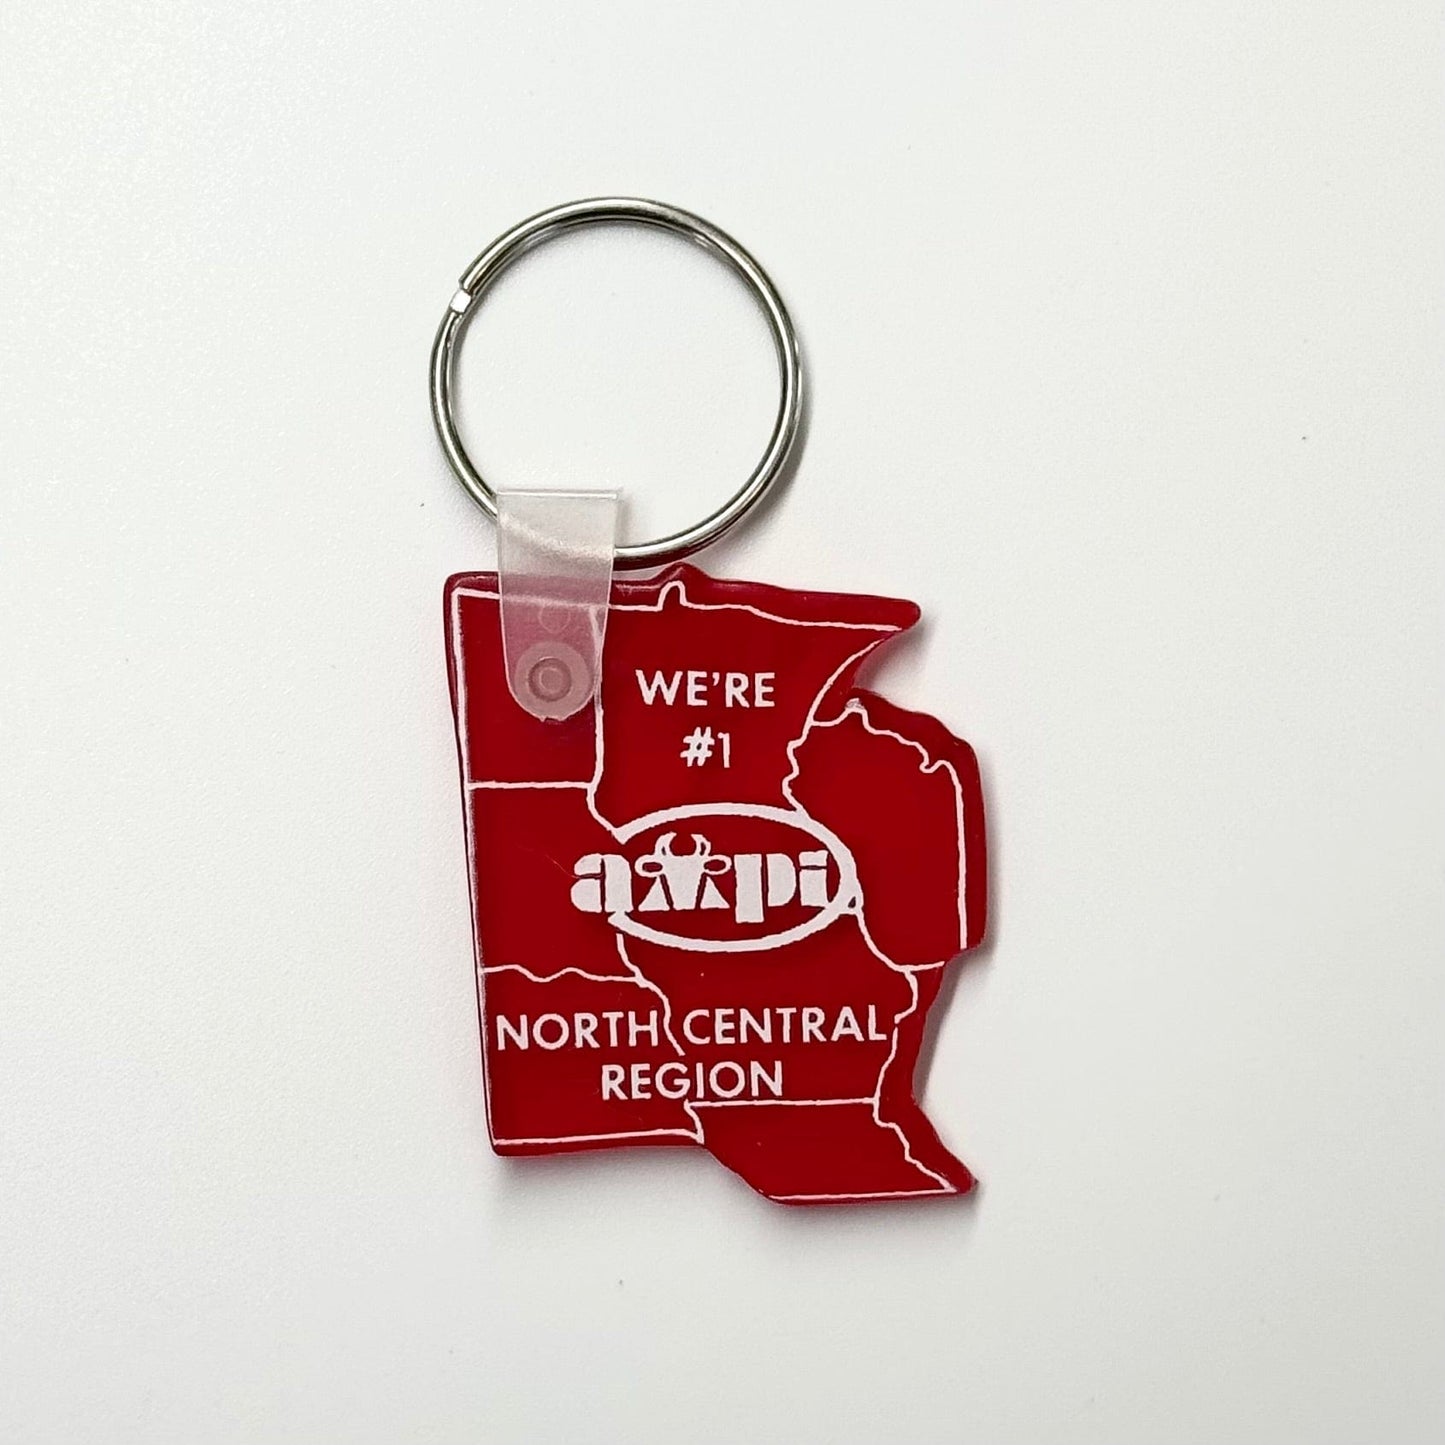 ‘American Milk Producers Inc’ Keychain Key Ring Red Rubber, EUC